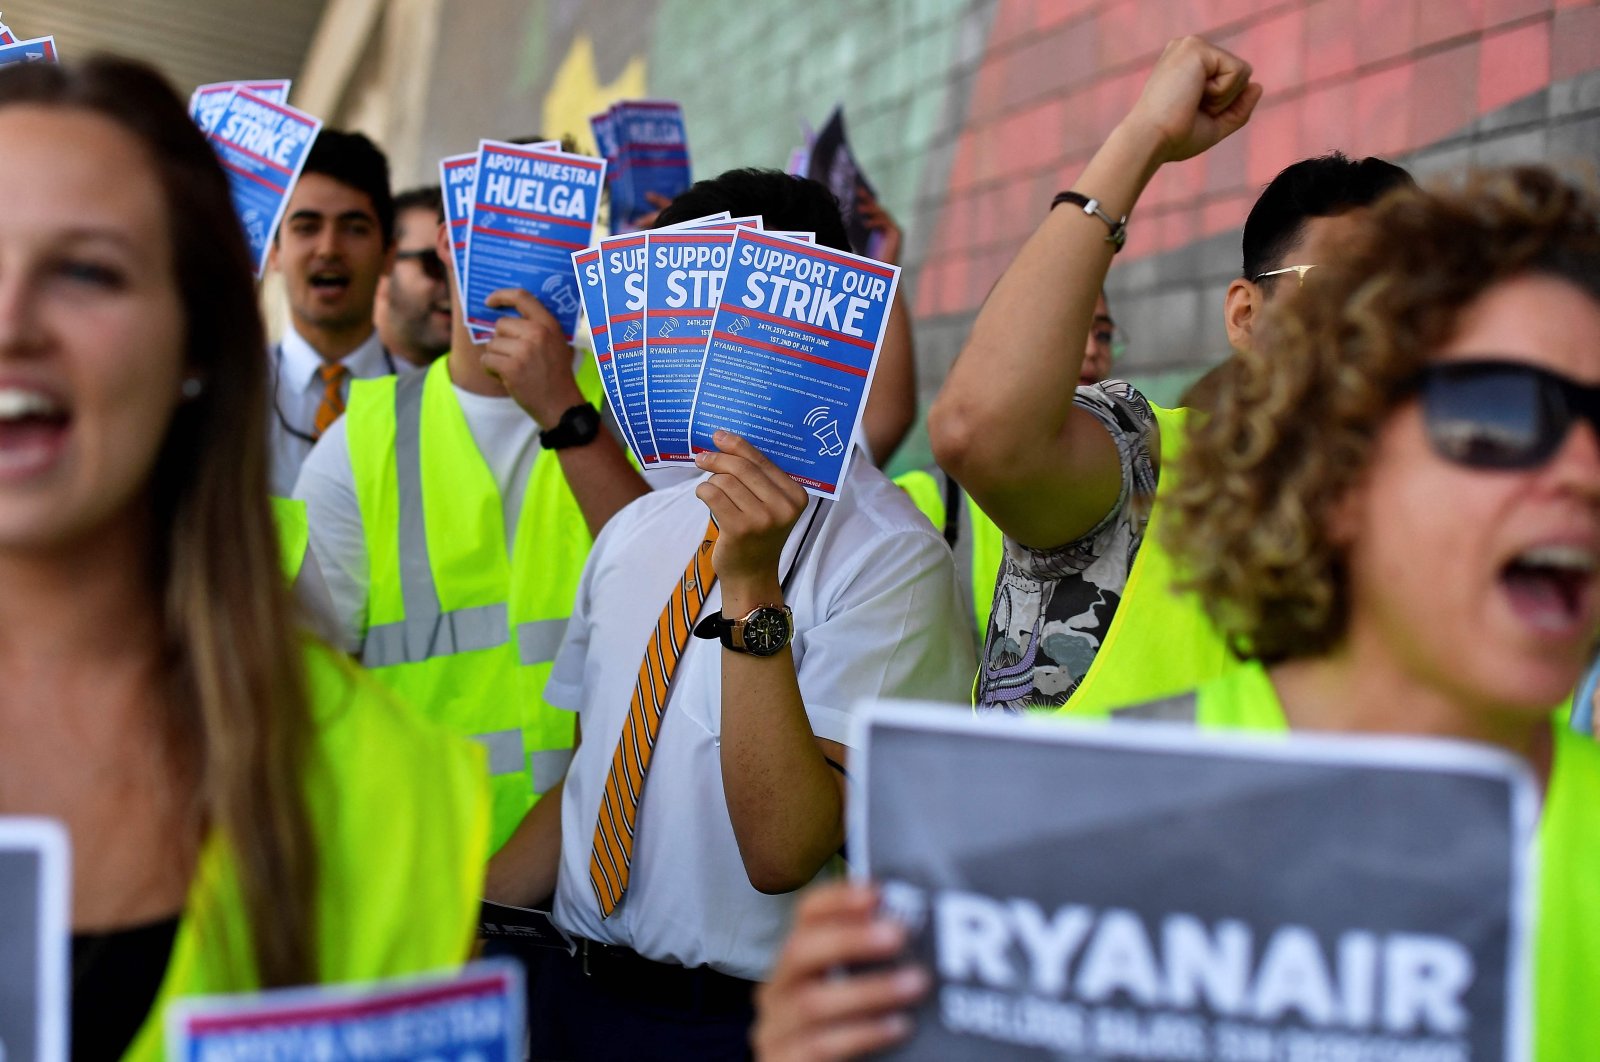 Ryanair employees hold flyers reading "Support our strike" as they protest at the Terminal 2 of El Prat airport in Barcelona, Spain, July 1, 2022. (AFP Photo)